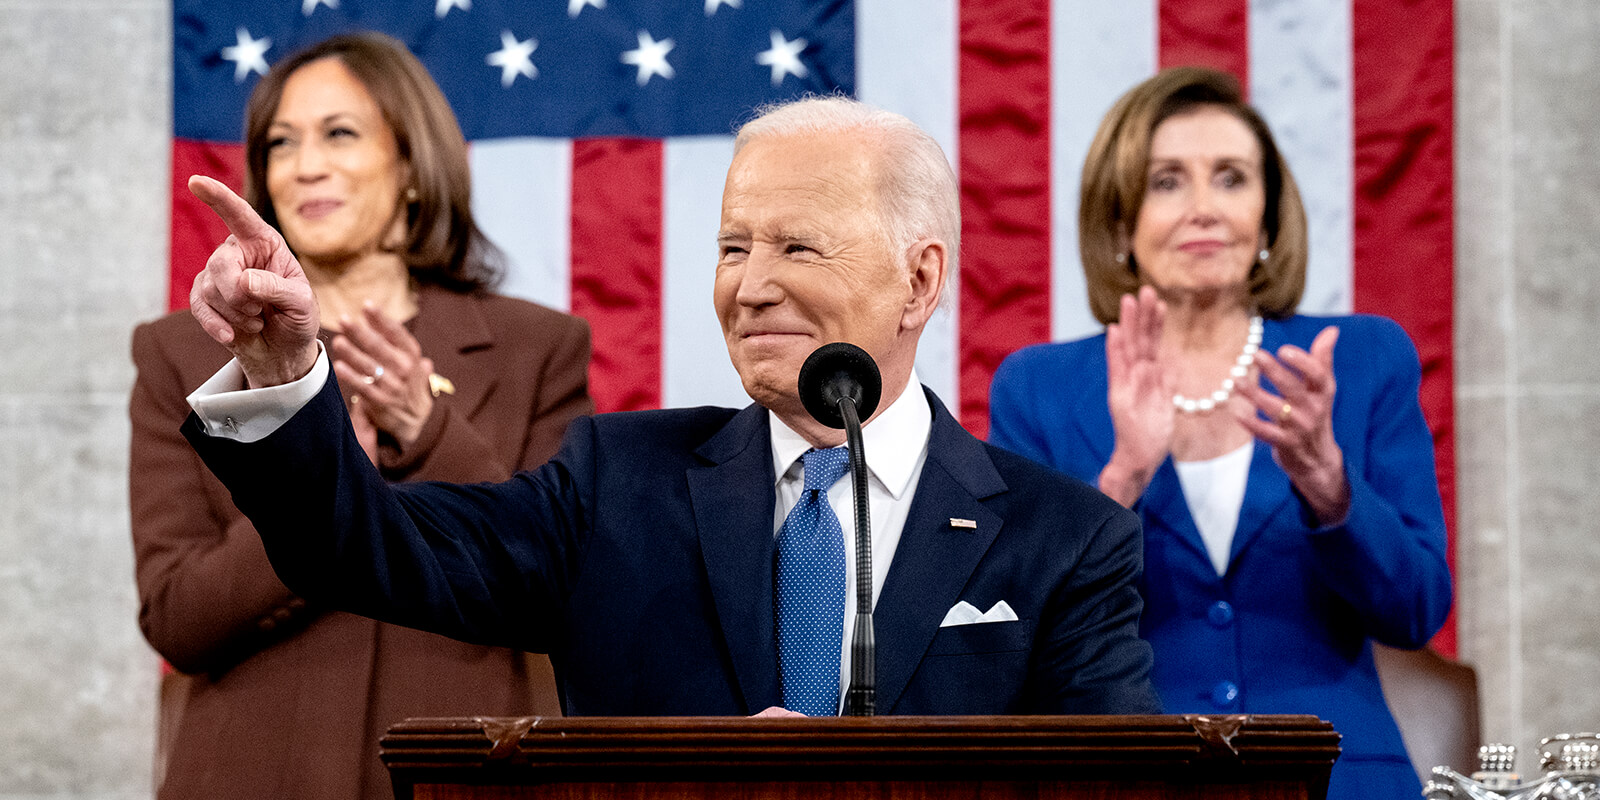 Stronger now and getting stronger: Biden outlines accomplishments and priorities